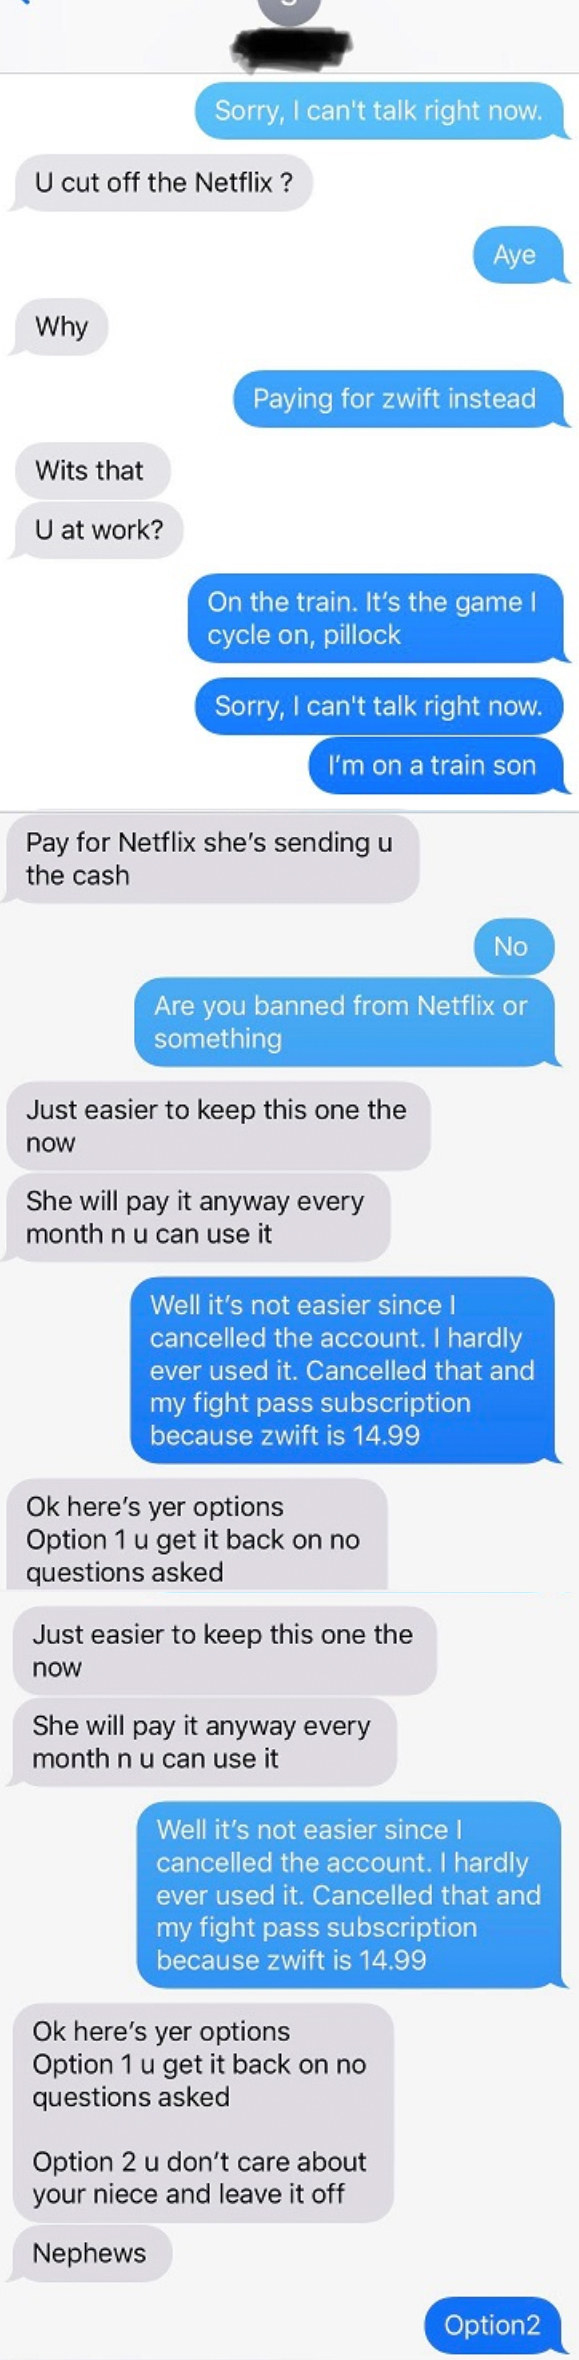 Someone is mad at their brother for cancelling Netflix and says they &quot;don&#x27;t care about&quot; their niece if they don&#x27;t turn it back on